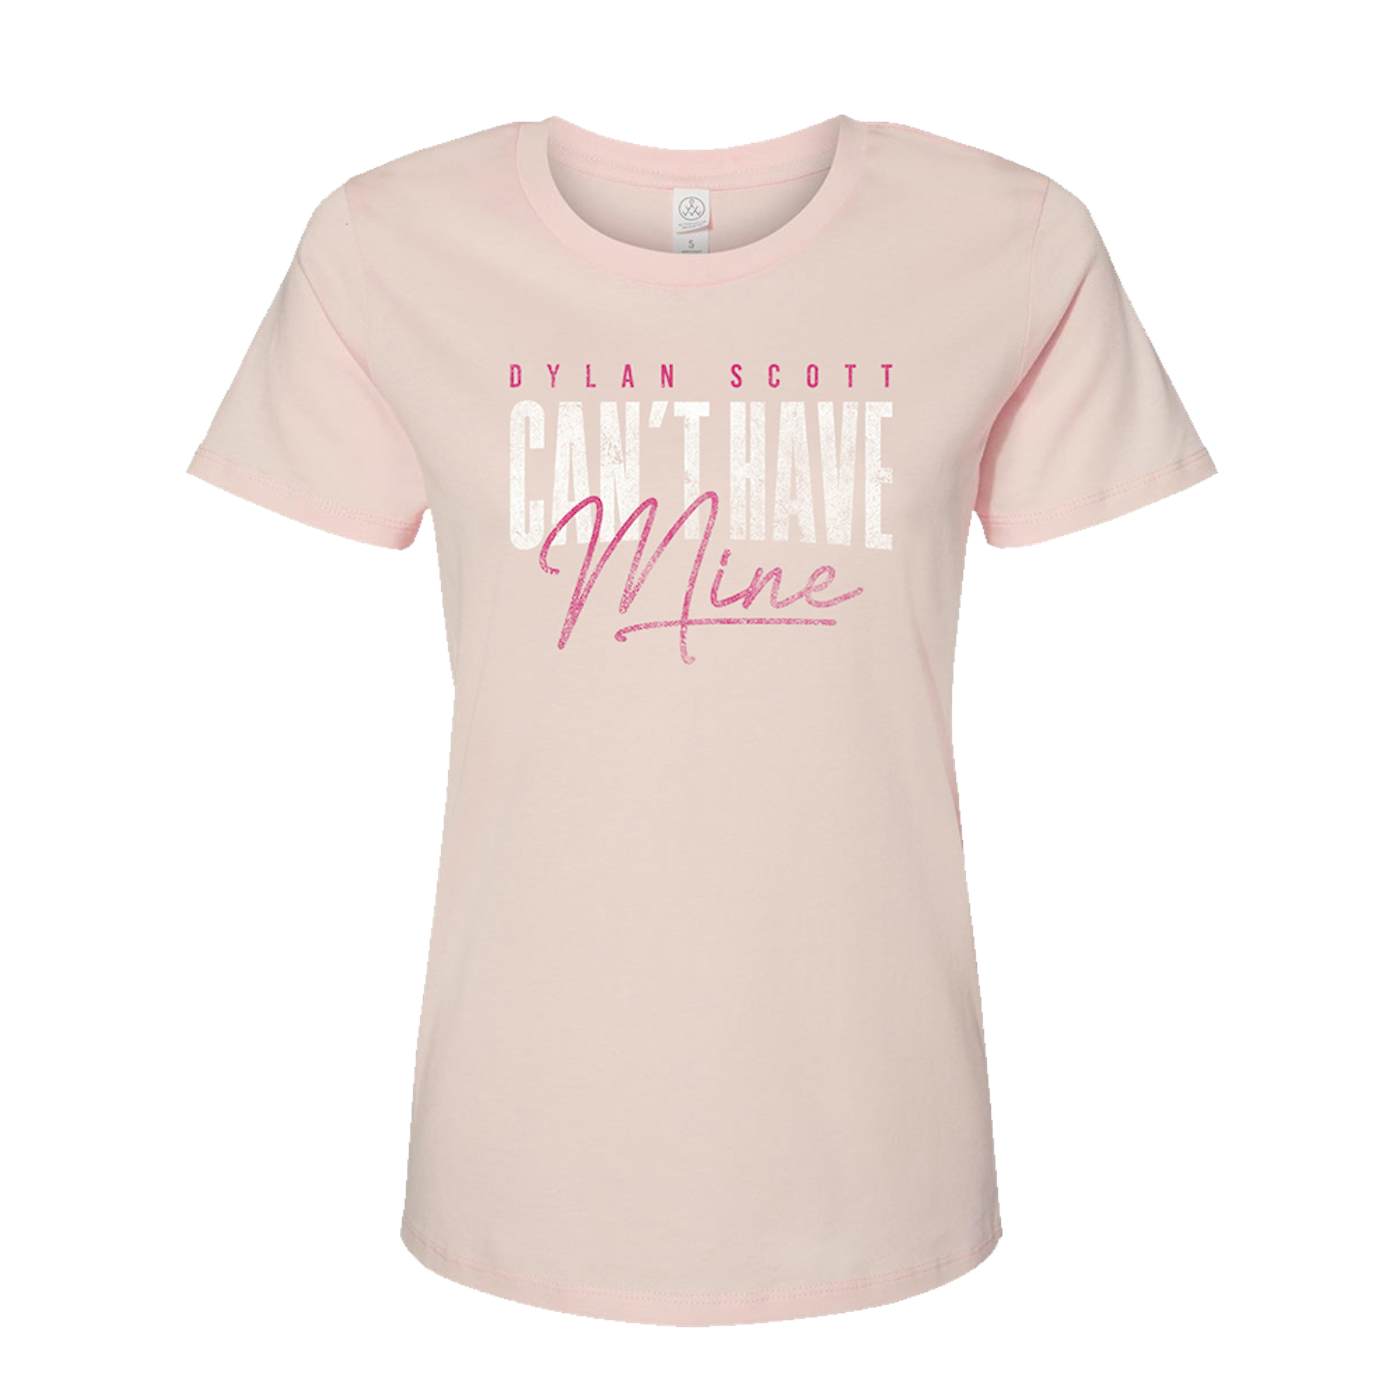 Dylan Scott Can't Have Mine Ladies Tee